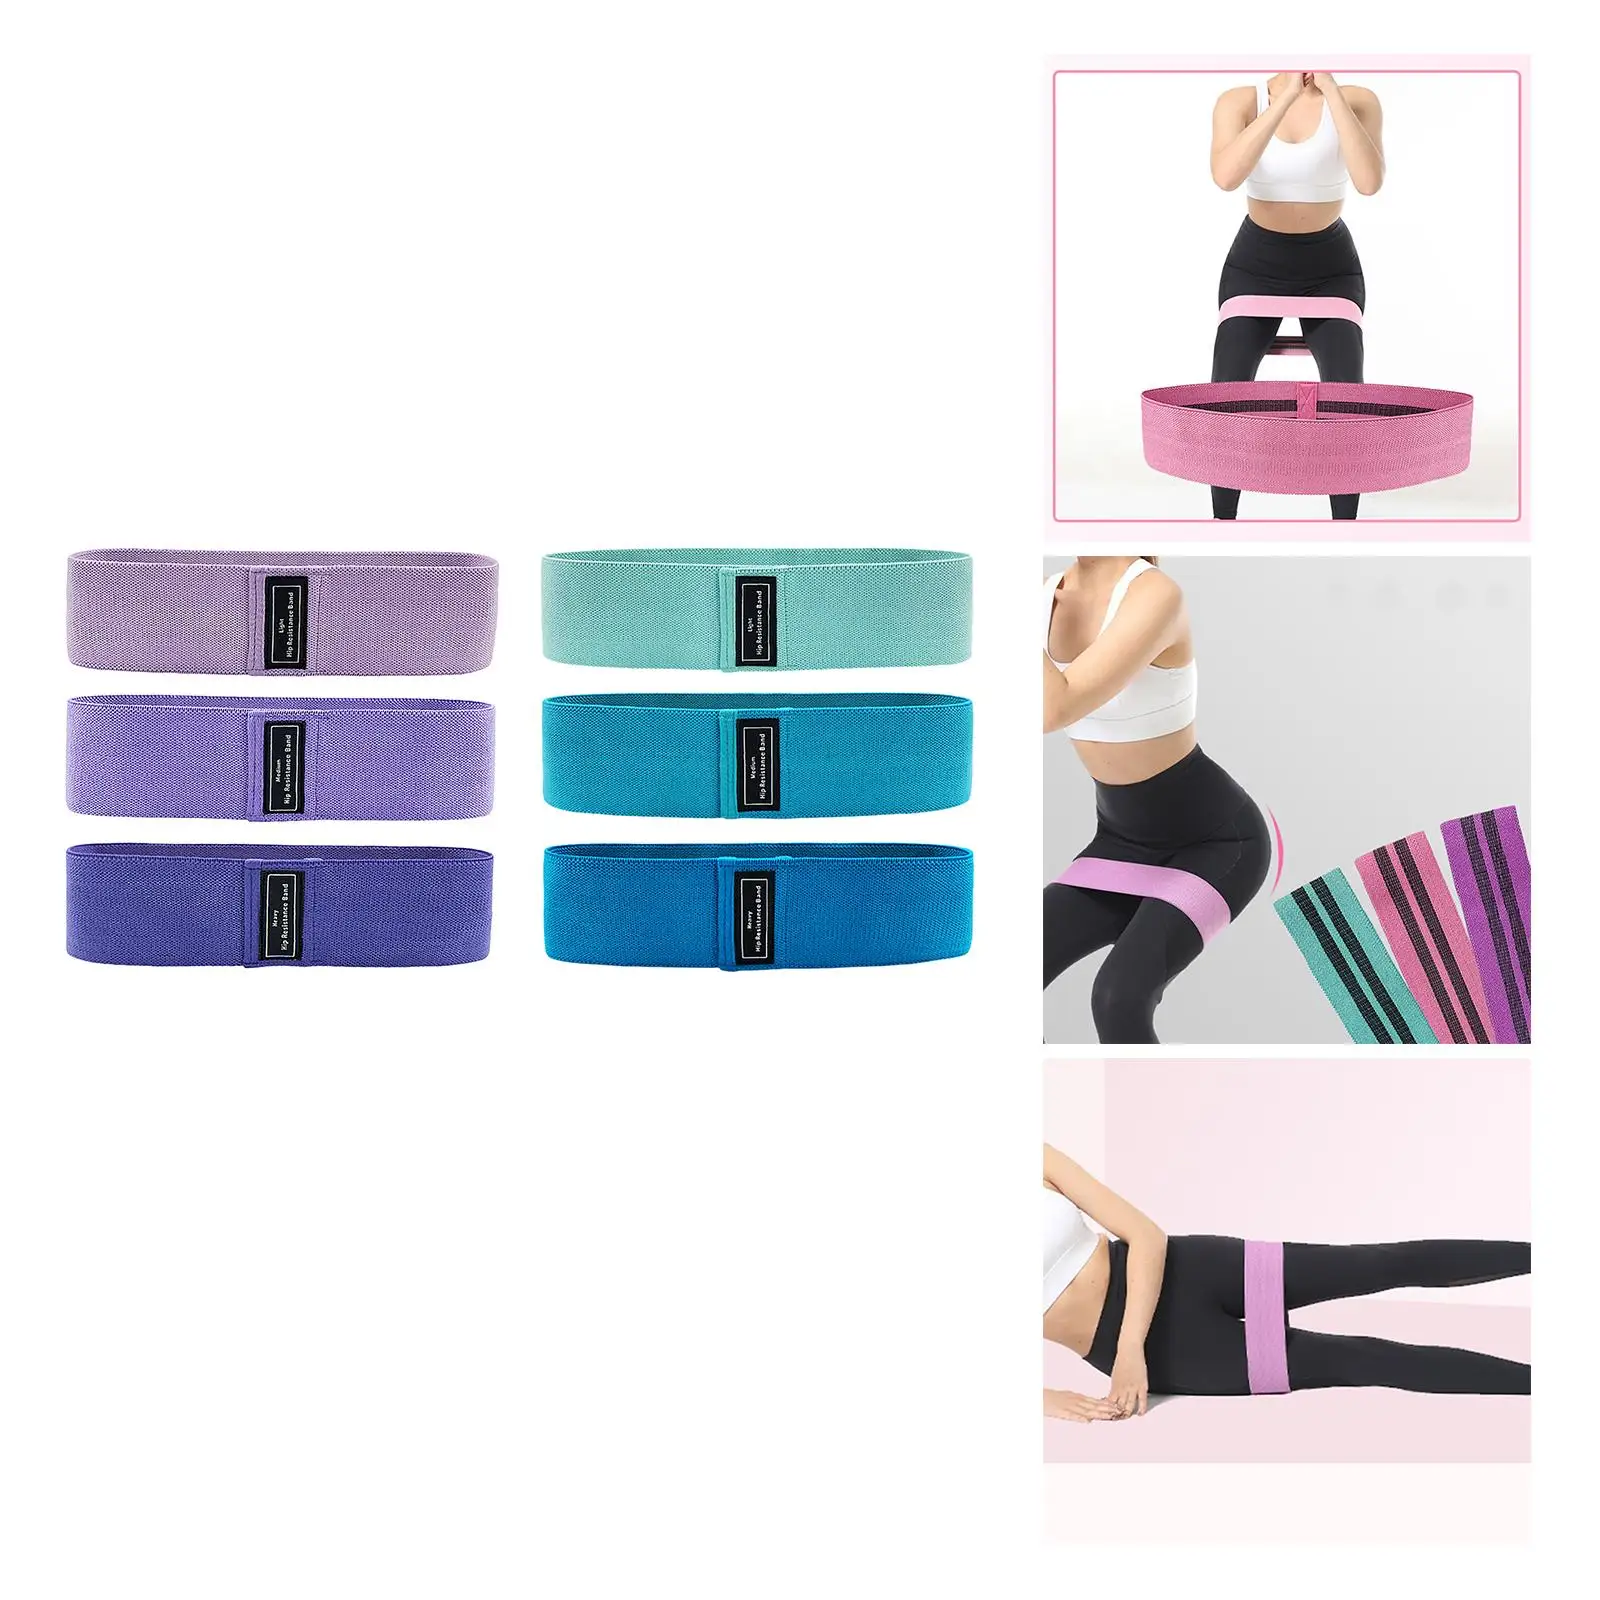 3x Resistance Bands Set Gym Stretch Straps Non Slip 3 Levels Workout for Women Men Thigh Leg Strength Training Fitness